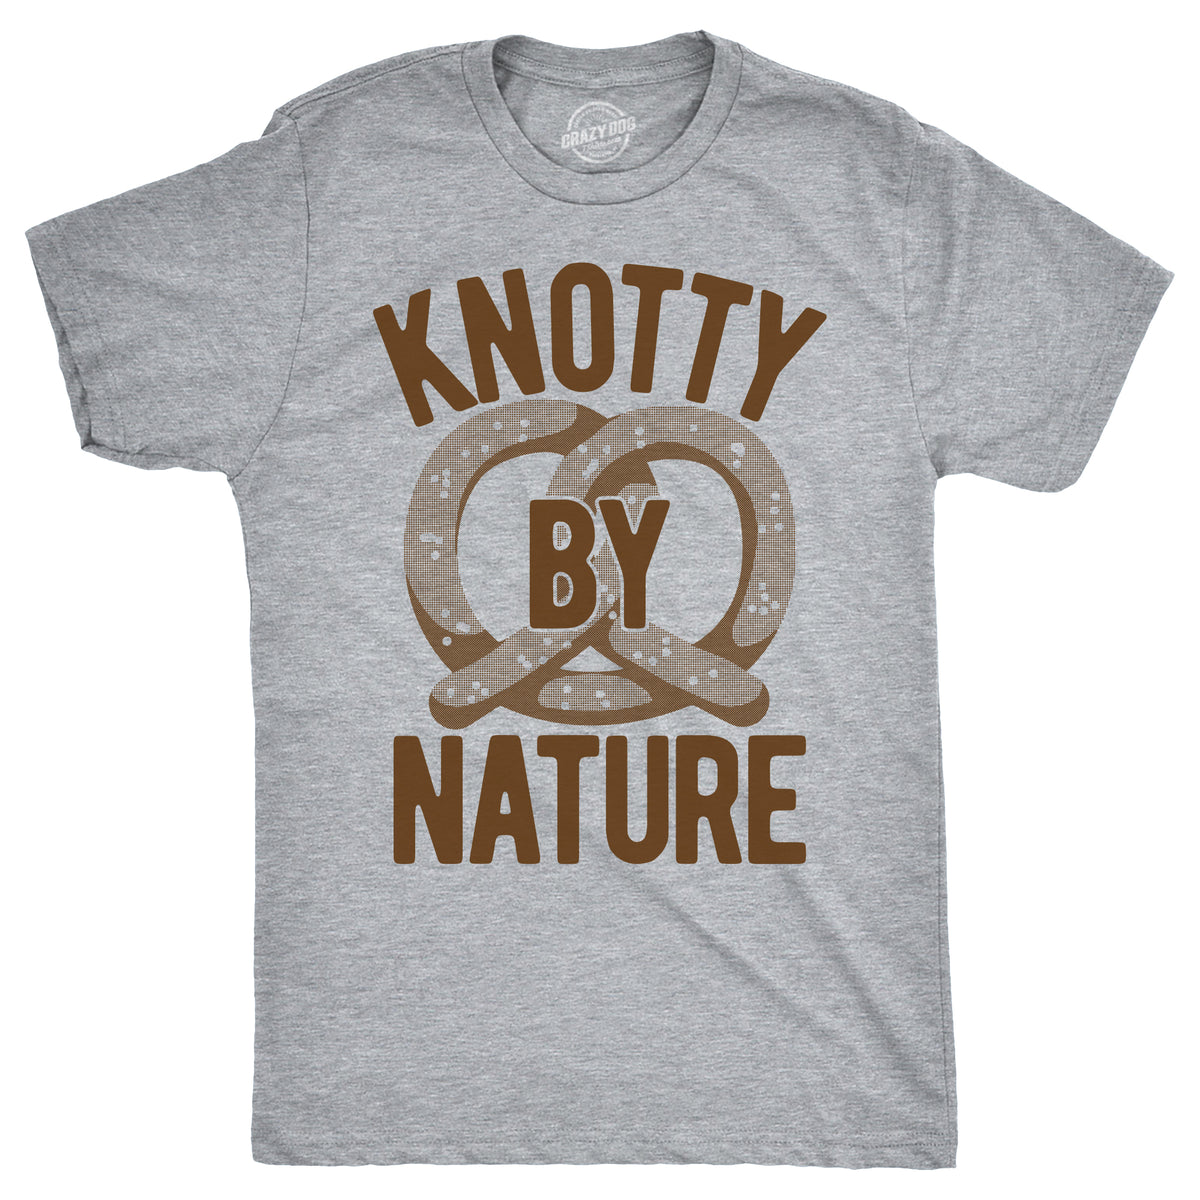 Funny Light Heather Grey - KNOTTY Knotty By Nature Mens T Shirt Nerdy Food sarcastic Tee